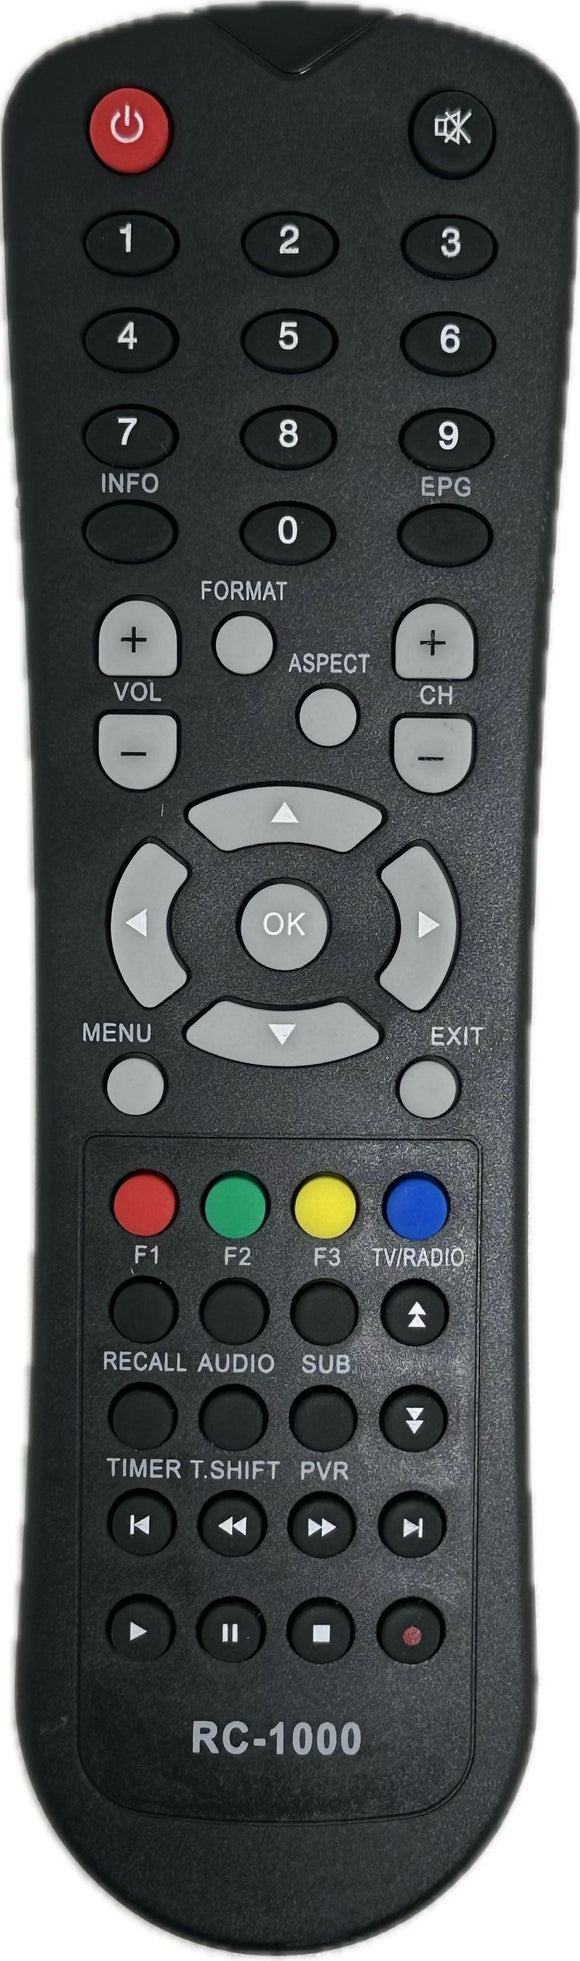 Bauhn AS-PVR1000R PVR Replacement Remote Control